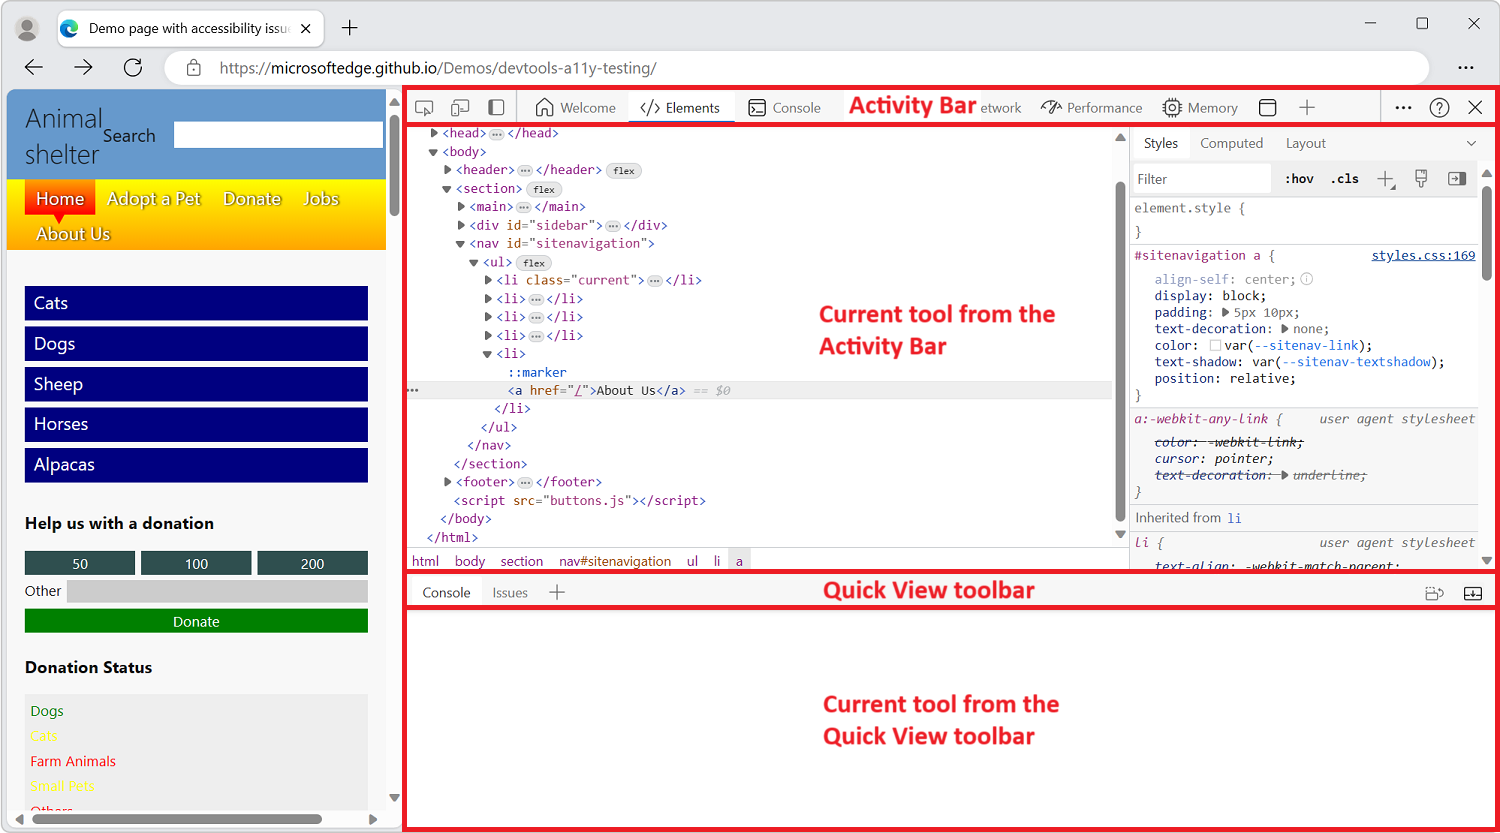 Microsoft Edge, with DevTools opened on the side, with the 4 main UI areas highlighted